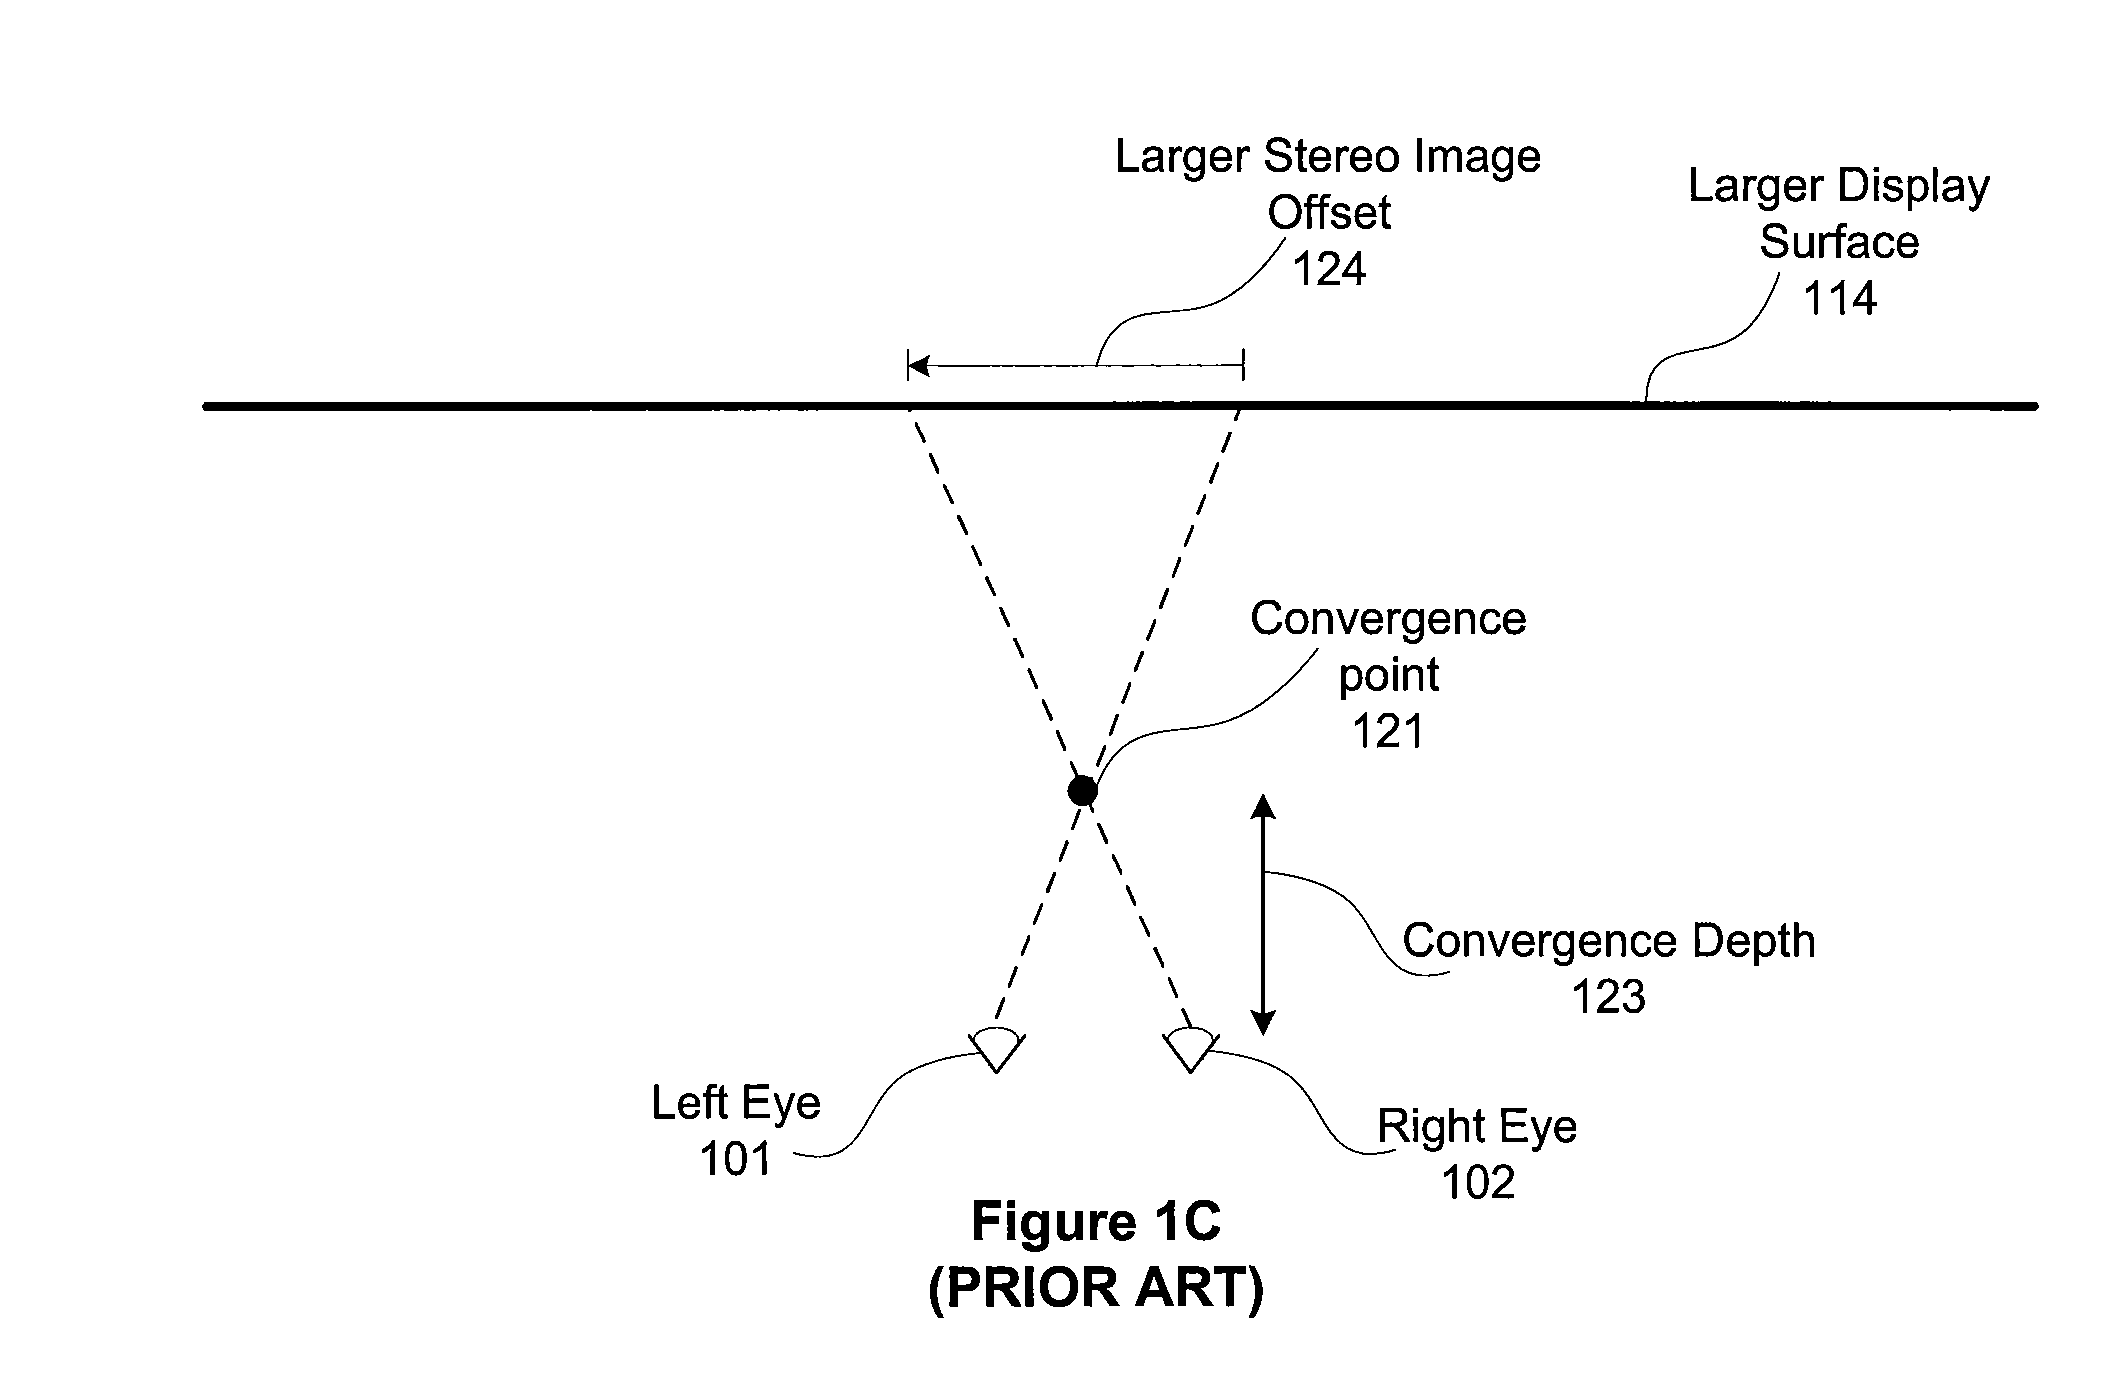 Stereo image convergence characterization and adjustment